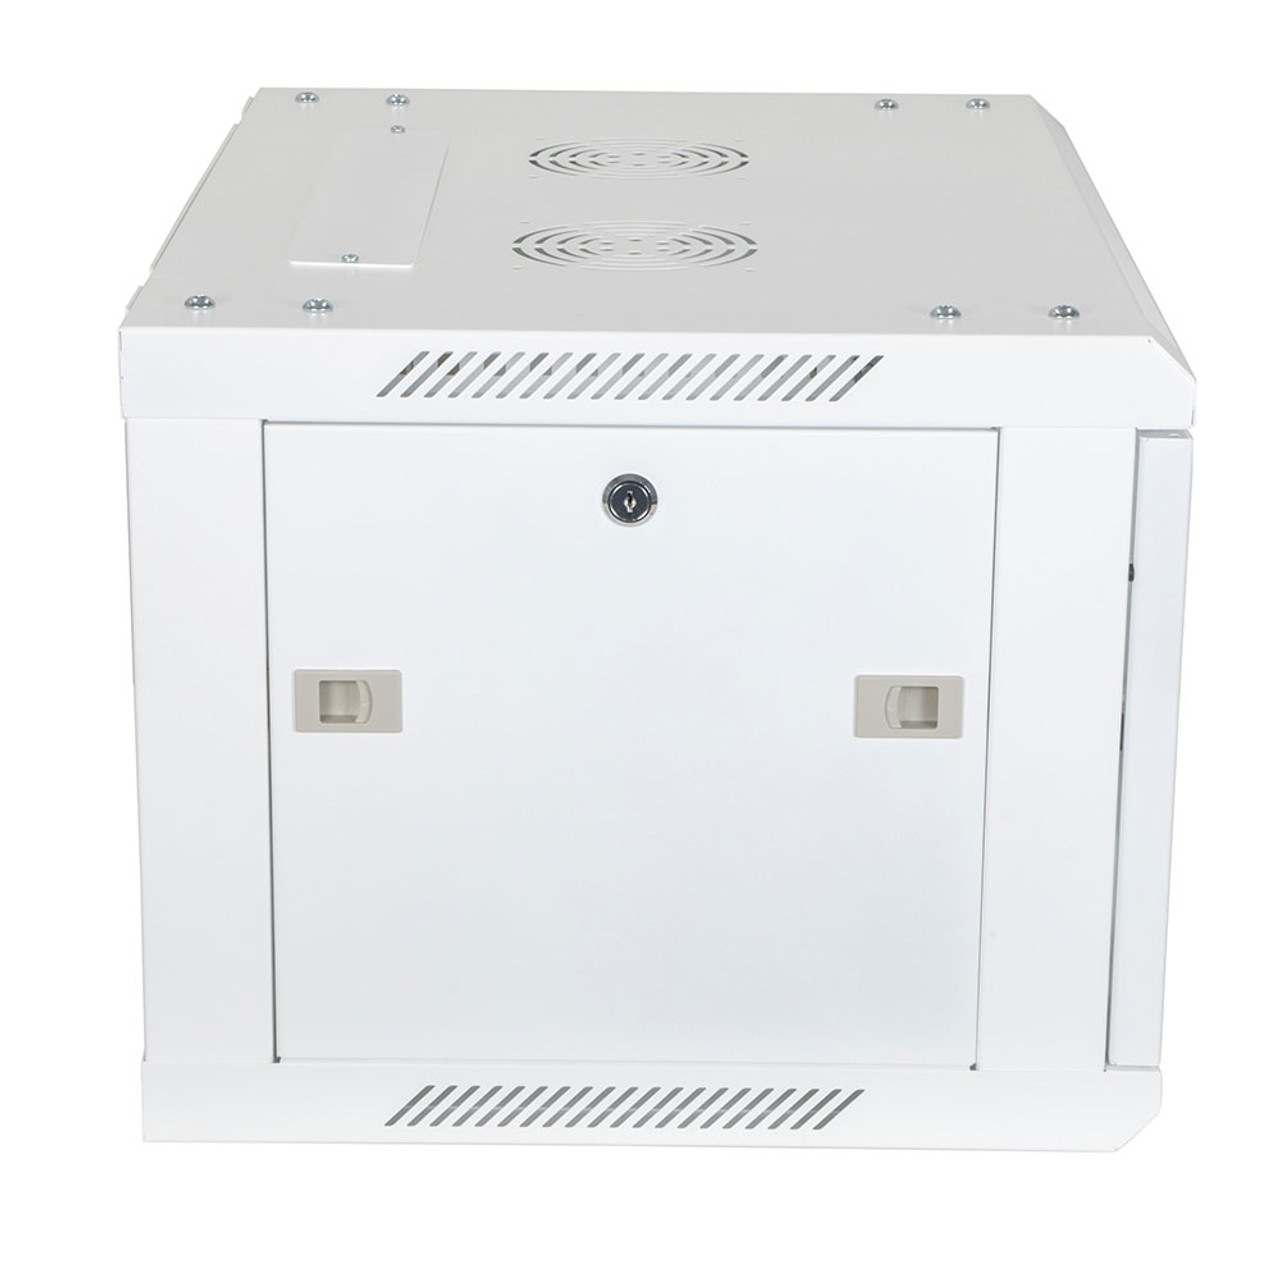 NavePoint 19-inch Wide Networking Cabinet, 9U, 23 Inches Deep, White